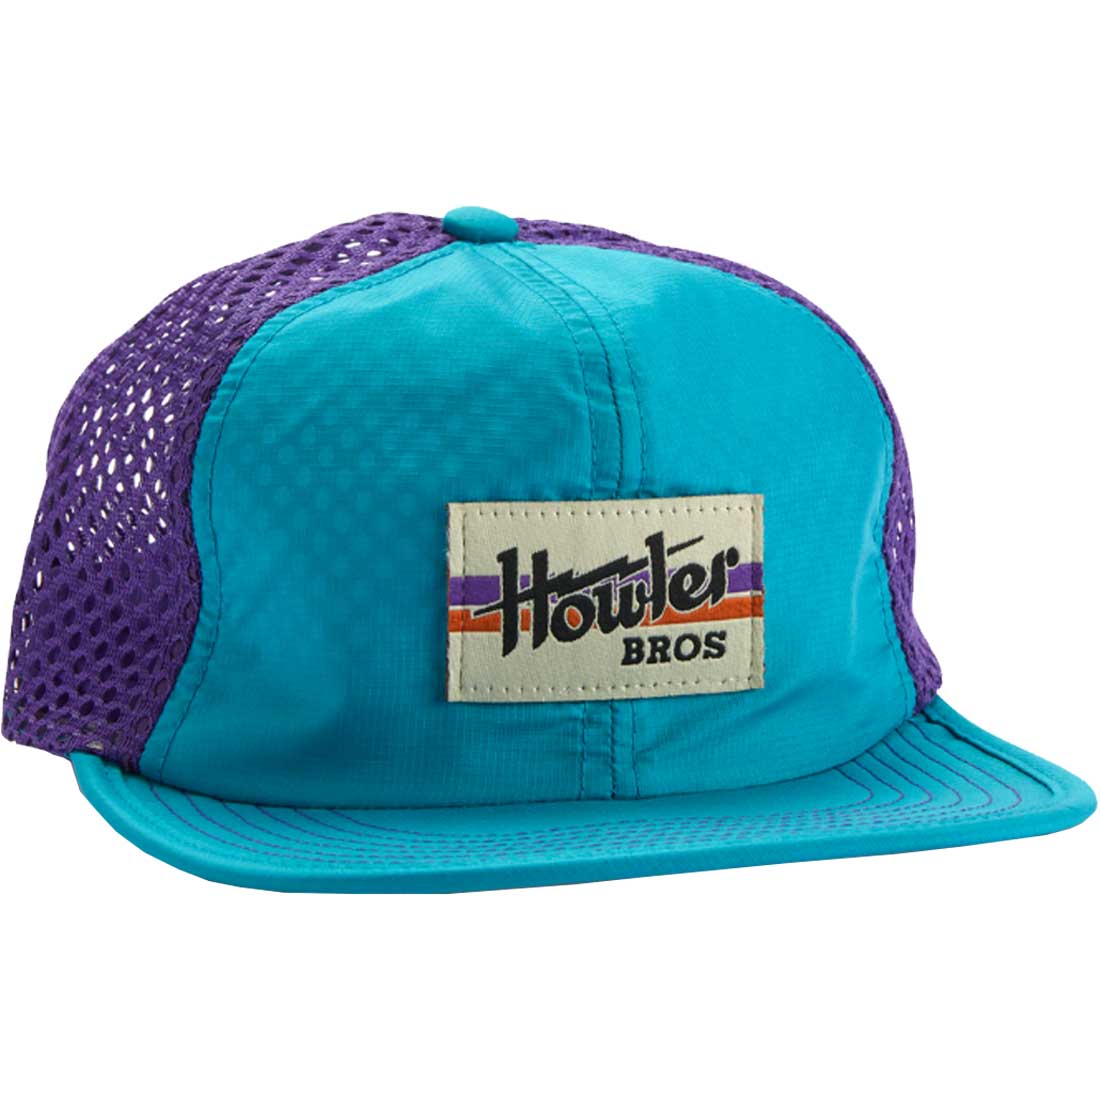 Howler Brothers Tech Strapback